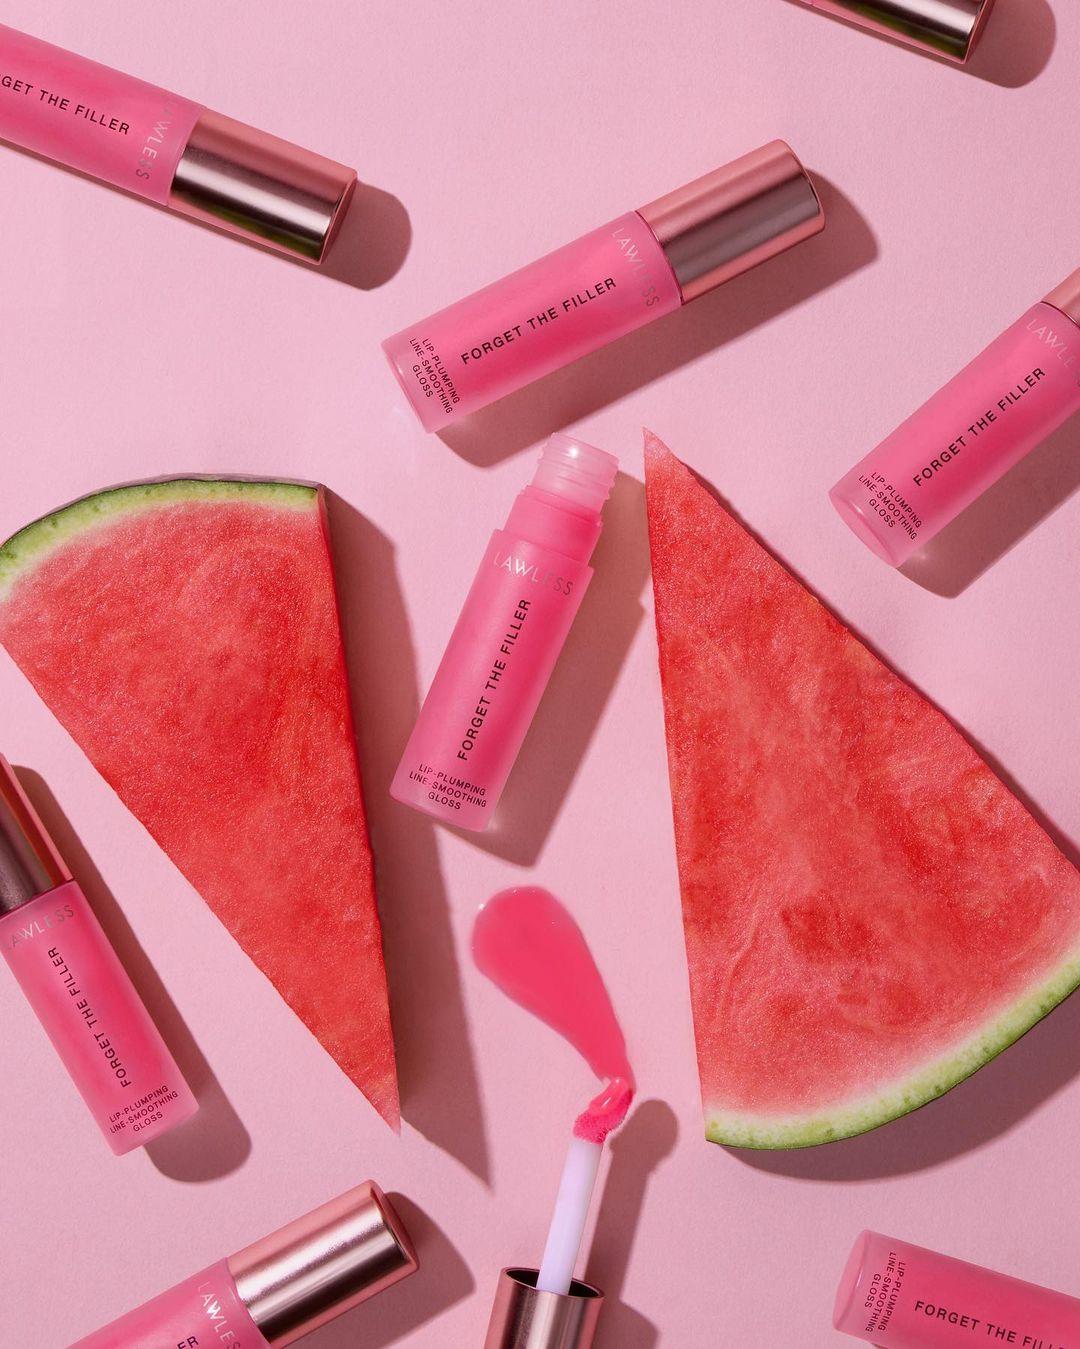 class="content__text"
 We don't know who needs to hear this but... lip plumpers DO NOT have to burn to work 👏

Take a peek at our newest obsession -- Forget The Filler Lip-Plumping Gloss in Juicy Watermelon 👇
1️⃣ It’s a stunning sheer watermelon shade with a pearl finish and has a DELICIOUS watermelon scent 🍉
2️⃣ It’s packed with CLEAN and CLINICALLY PROVEN ingredients that work to PLUMP, SMOOTH, and HYDRATE lips 💦 without burning or irritating! 🙅‍♀️
3️⃣ Immediately after application lip lines look filled and the lip surface looks smooth af leaving you with an ultra-glossy, glass-like finish ✨

Proof in the PLUMP 👄👇
Powered by MAXI-LIP™ 💋 — In an independent study on 10 women ages 22-40 on MAXI-LIP™, it was noted:
👄 Improved lip condition by +100%
👄 Improved lip hydration +60%
👄 Increased lip volume +40%

Shop on Lawlessbeauty.com or at #Sephora! 
 